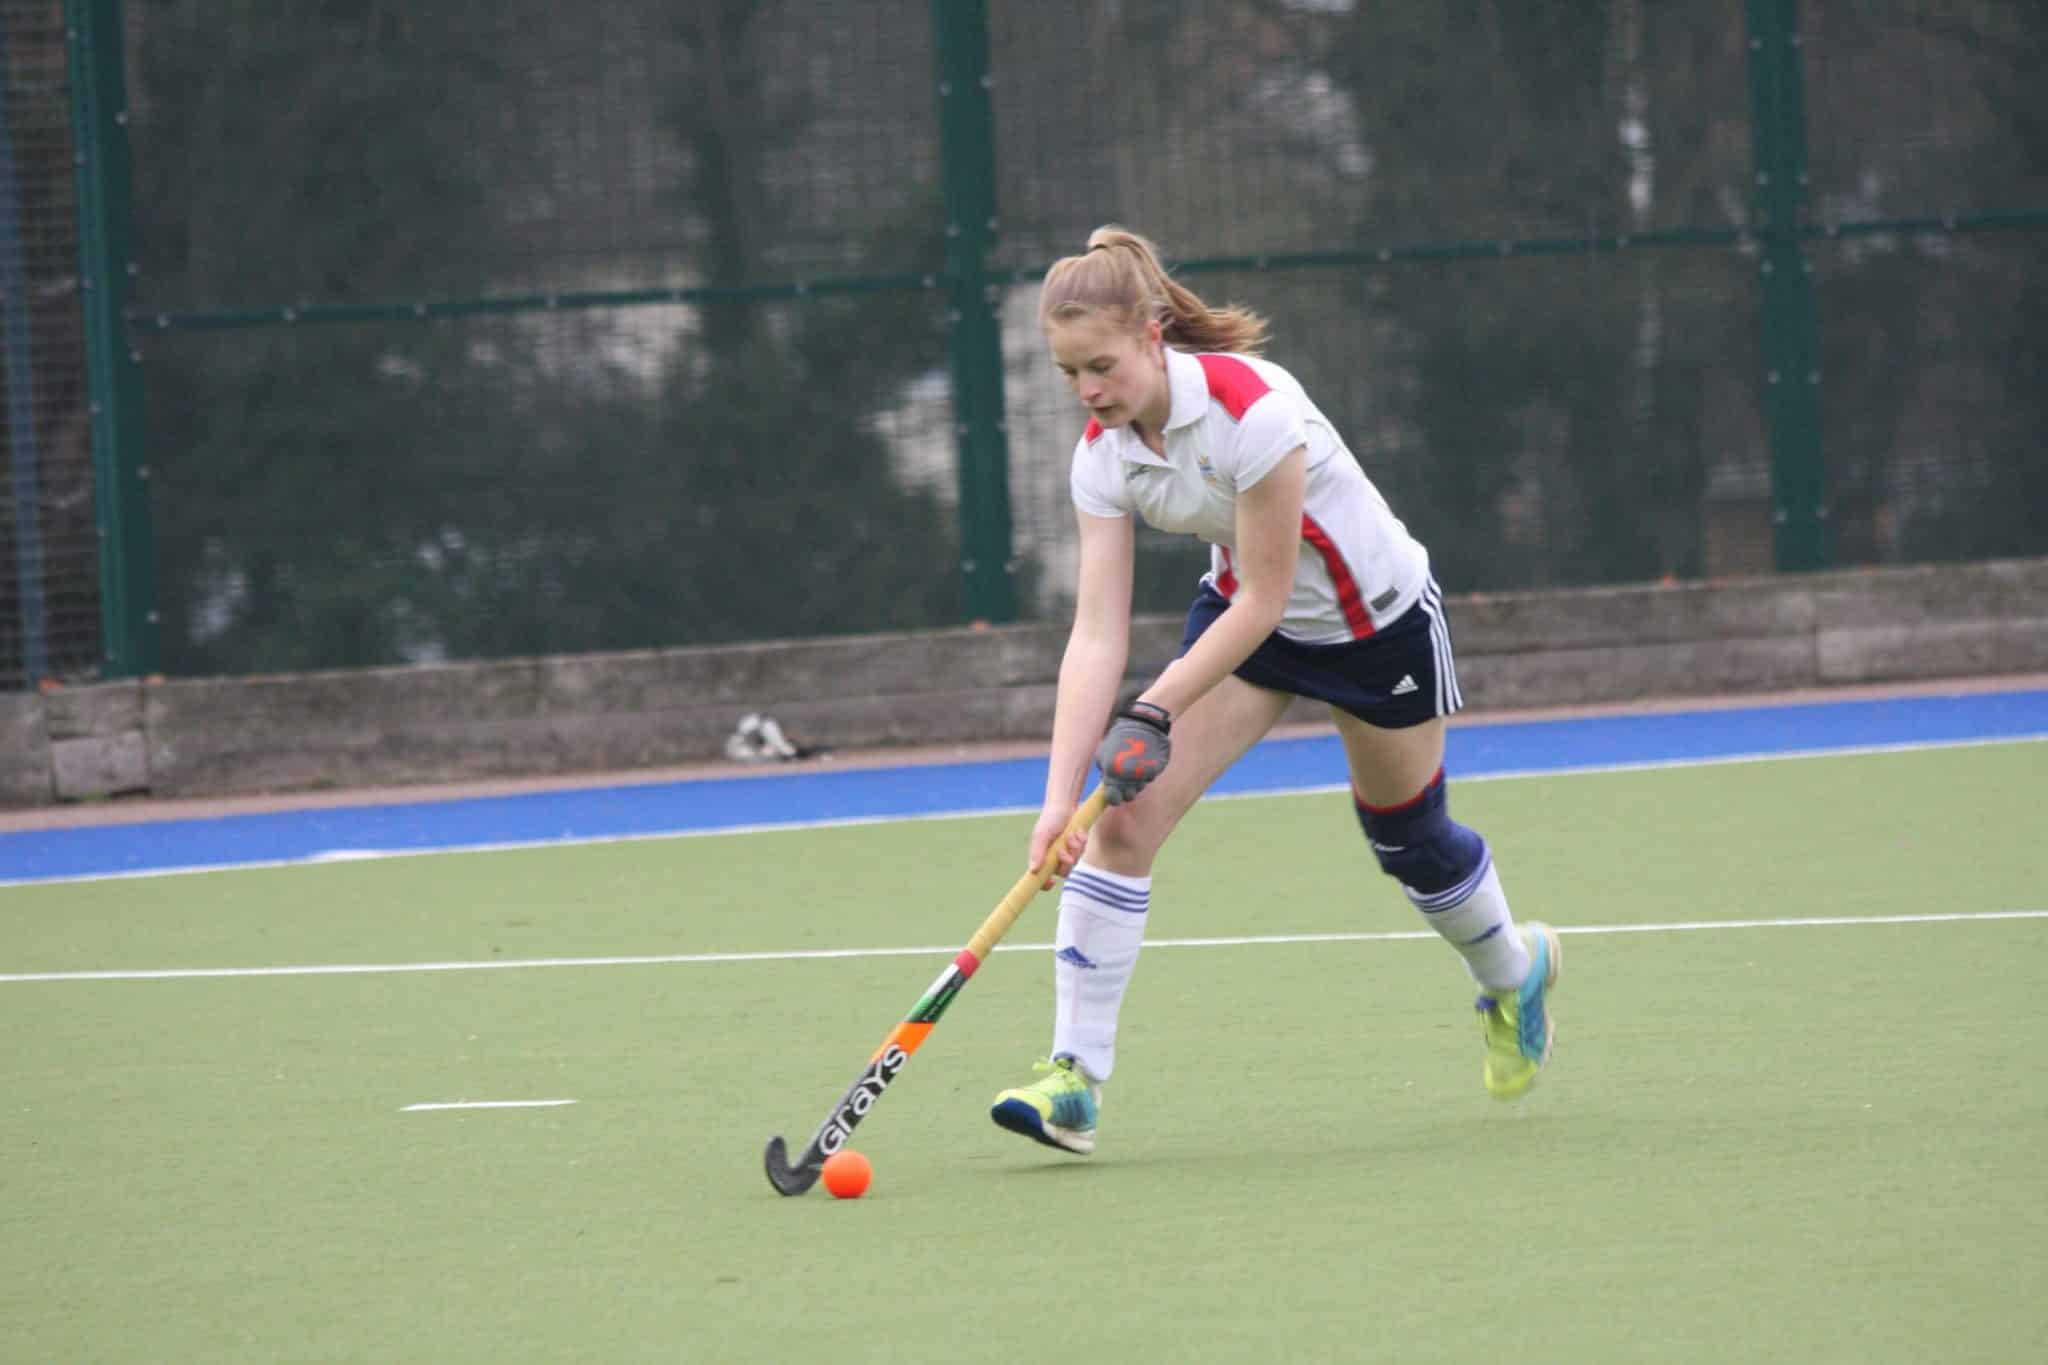 Hockey: Harris preserves Tunbridge Wells men's lead while Glubb grounds out win for Ladies